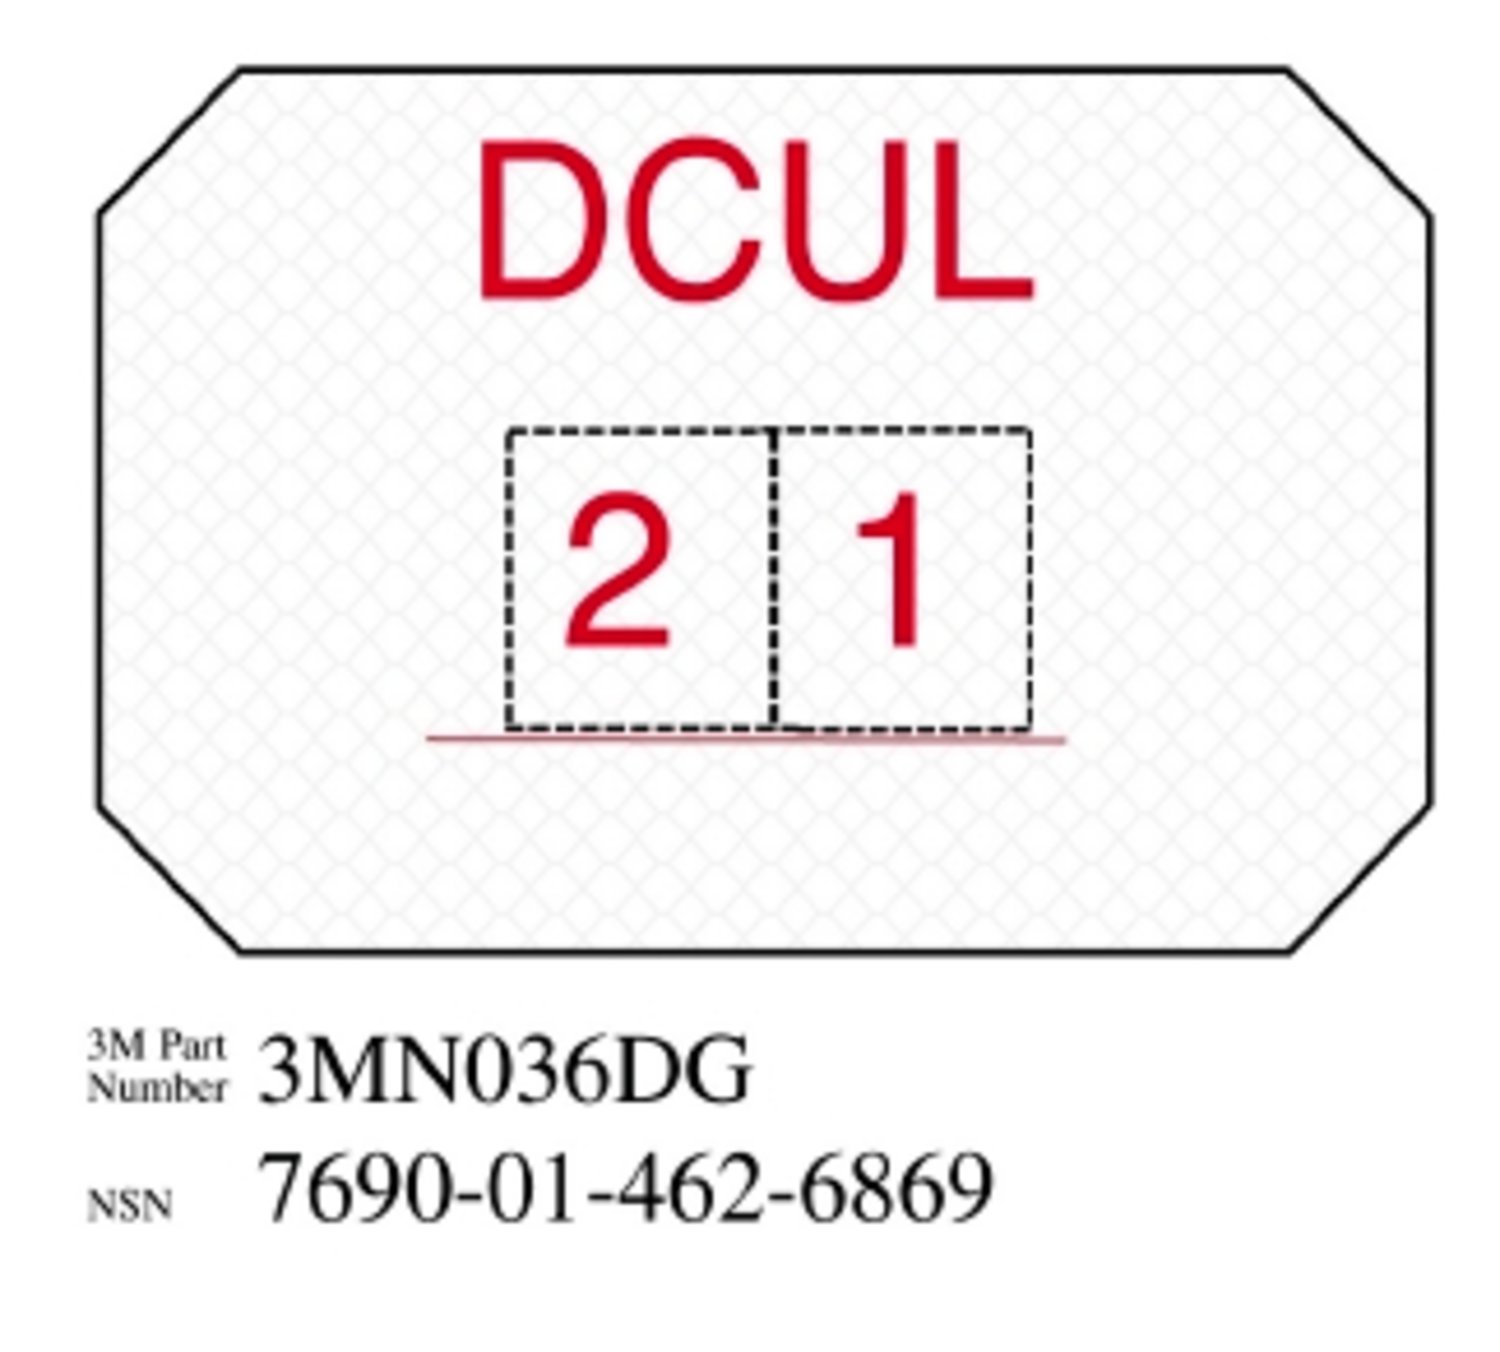 7010388680 - 3M Diamond Grade Damage Control Sign 3MN036DG, "DCUL", 8 in x 12 in,
10/Package